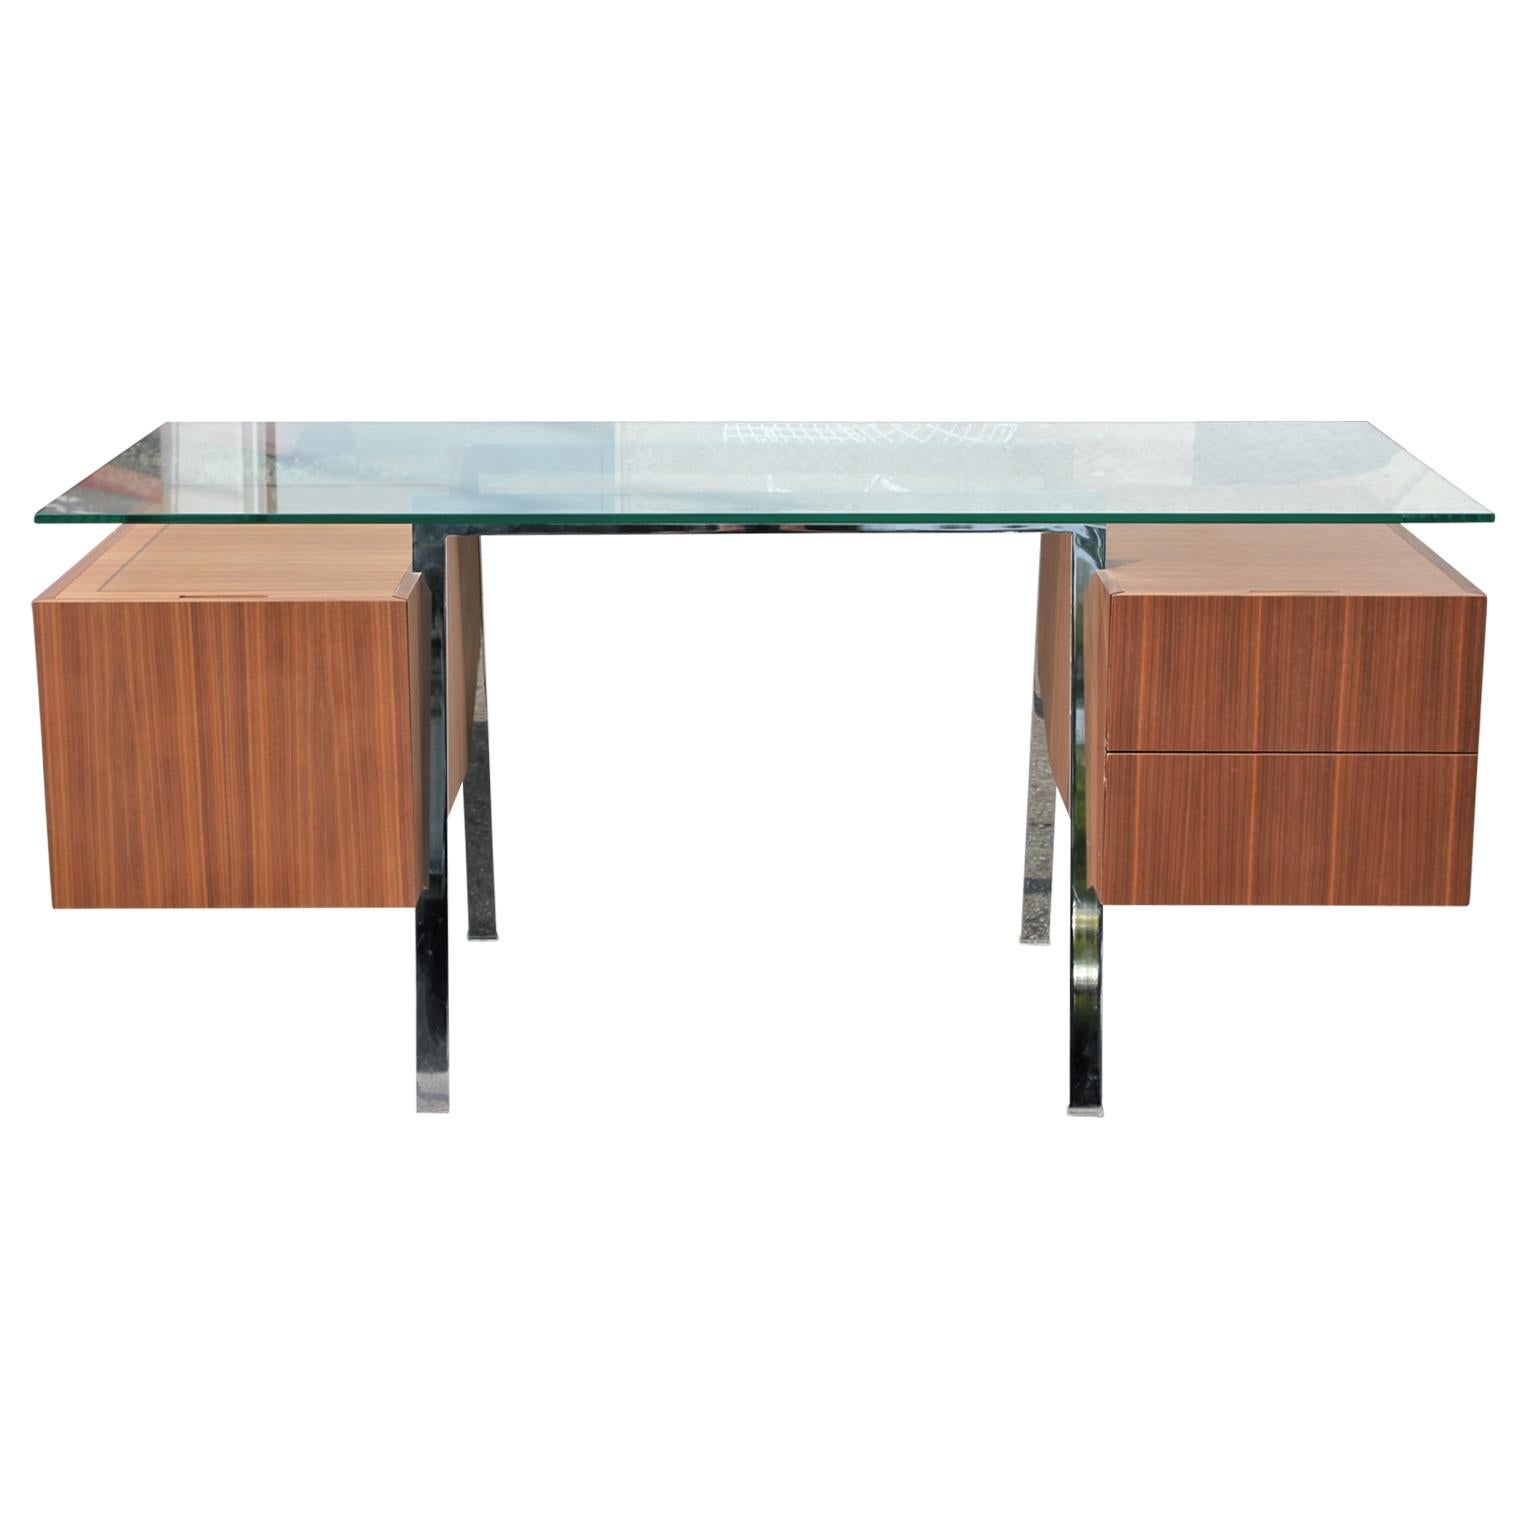 Mid-Century Modern style homework desk by Danish designer Niels Bendtsen. The piece features a glass top floating on a chrome steel frame. There are two drawers on the right and a hanging file system on the left.

Glass top dimensions: W 64 in. x